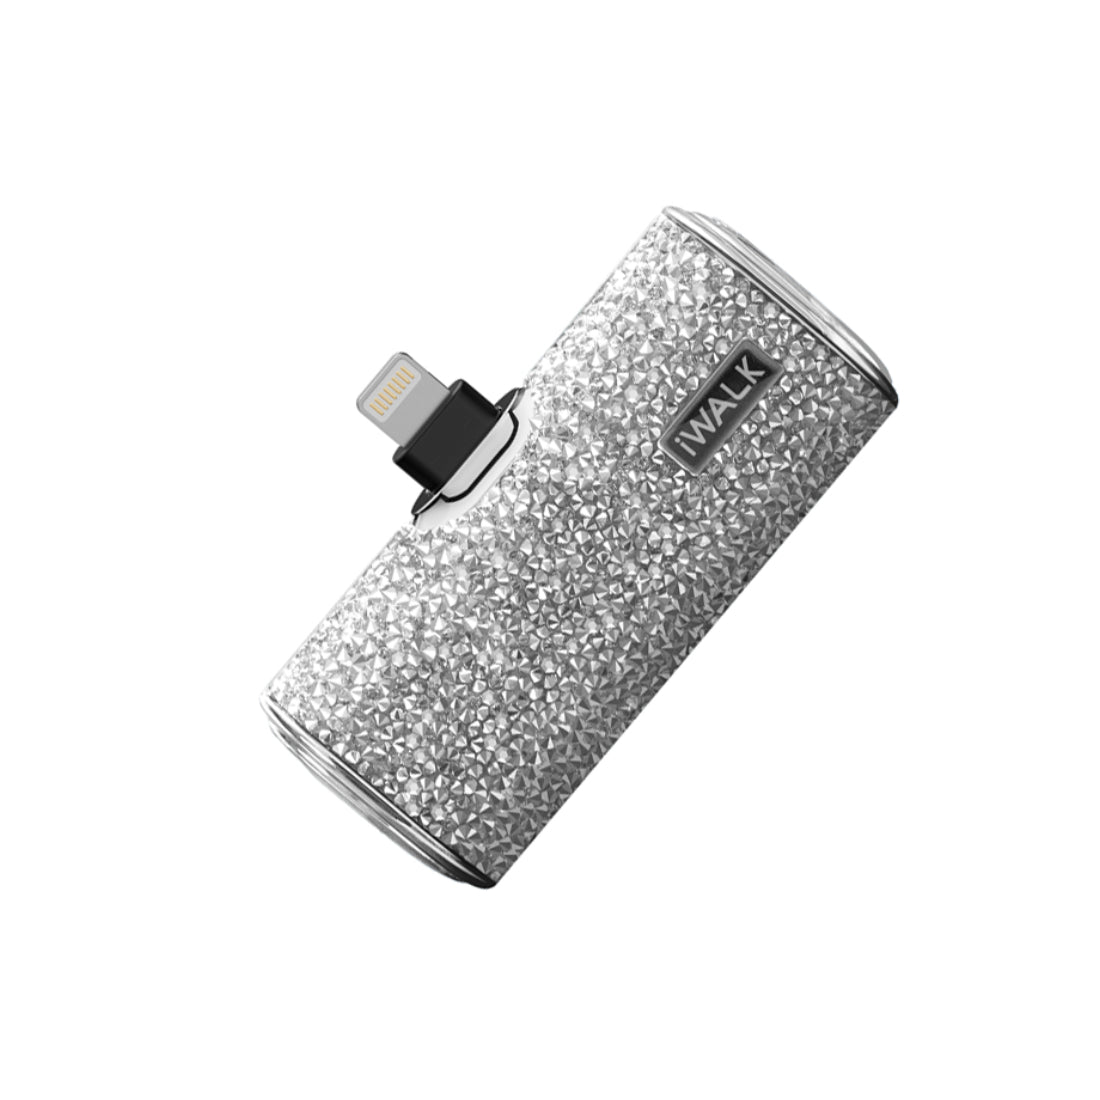 iWalk Portable Charger Power Bank 4500mAh Lightning type Ultra-Compact Battery Pack - Silver - مزود طاقة - Store 974 | ستور ٩٧٤